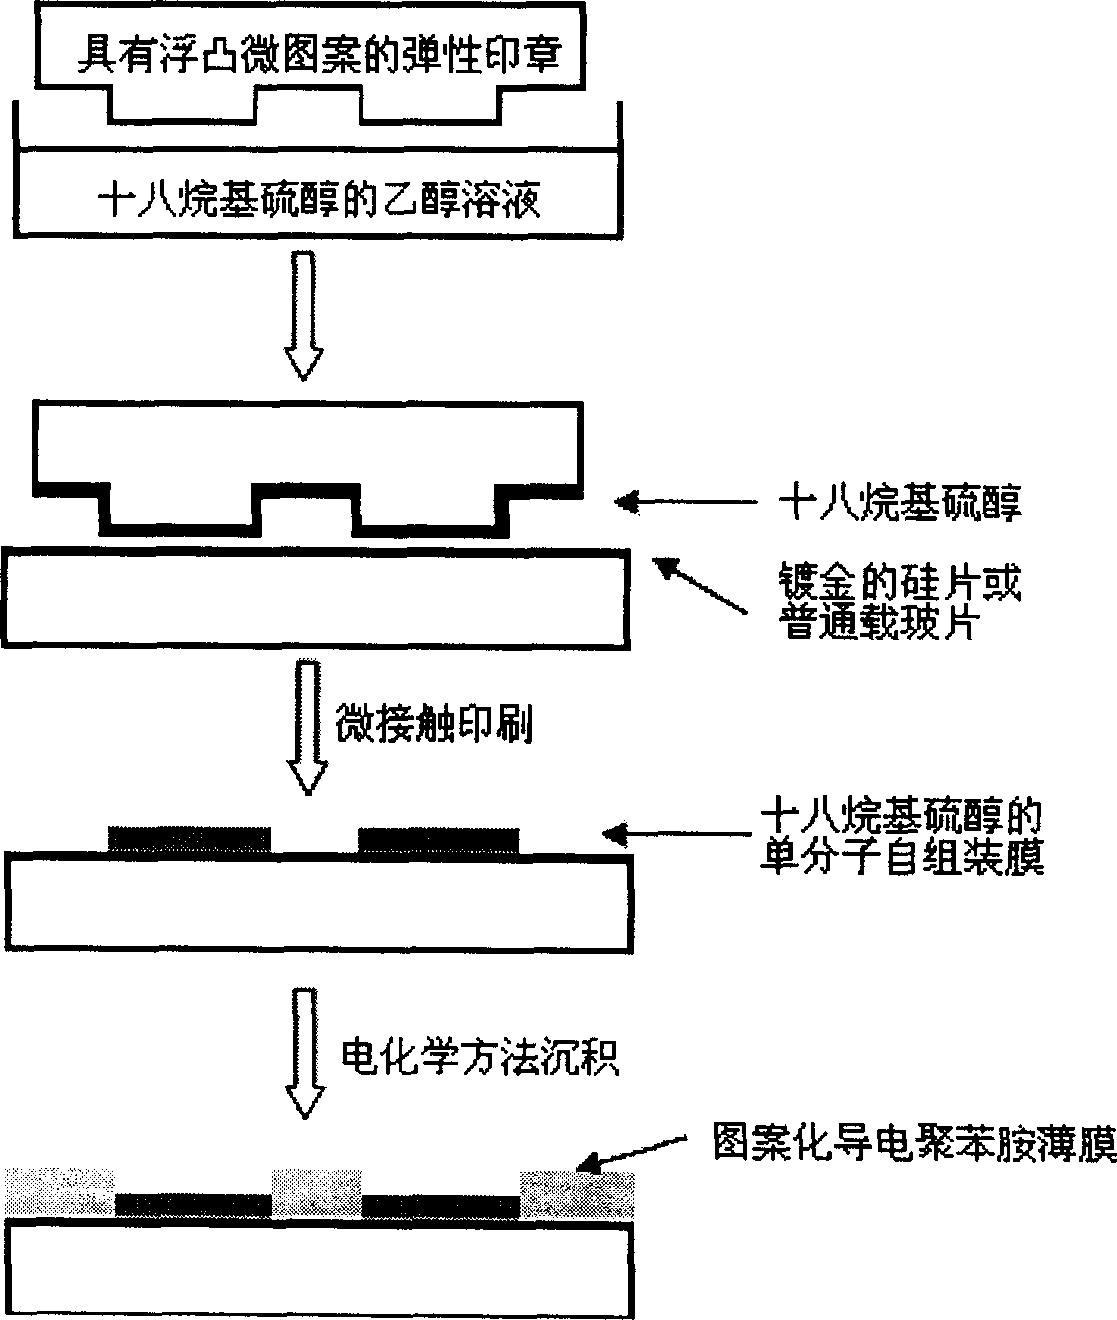 Process for producing gold surface pattern conductive polyphenylamine film